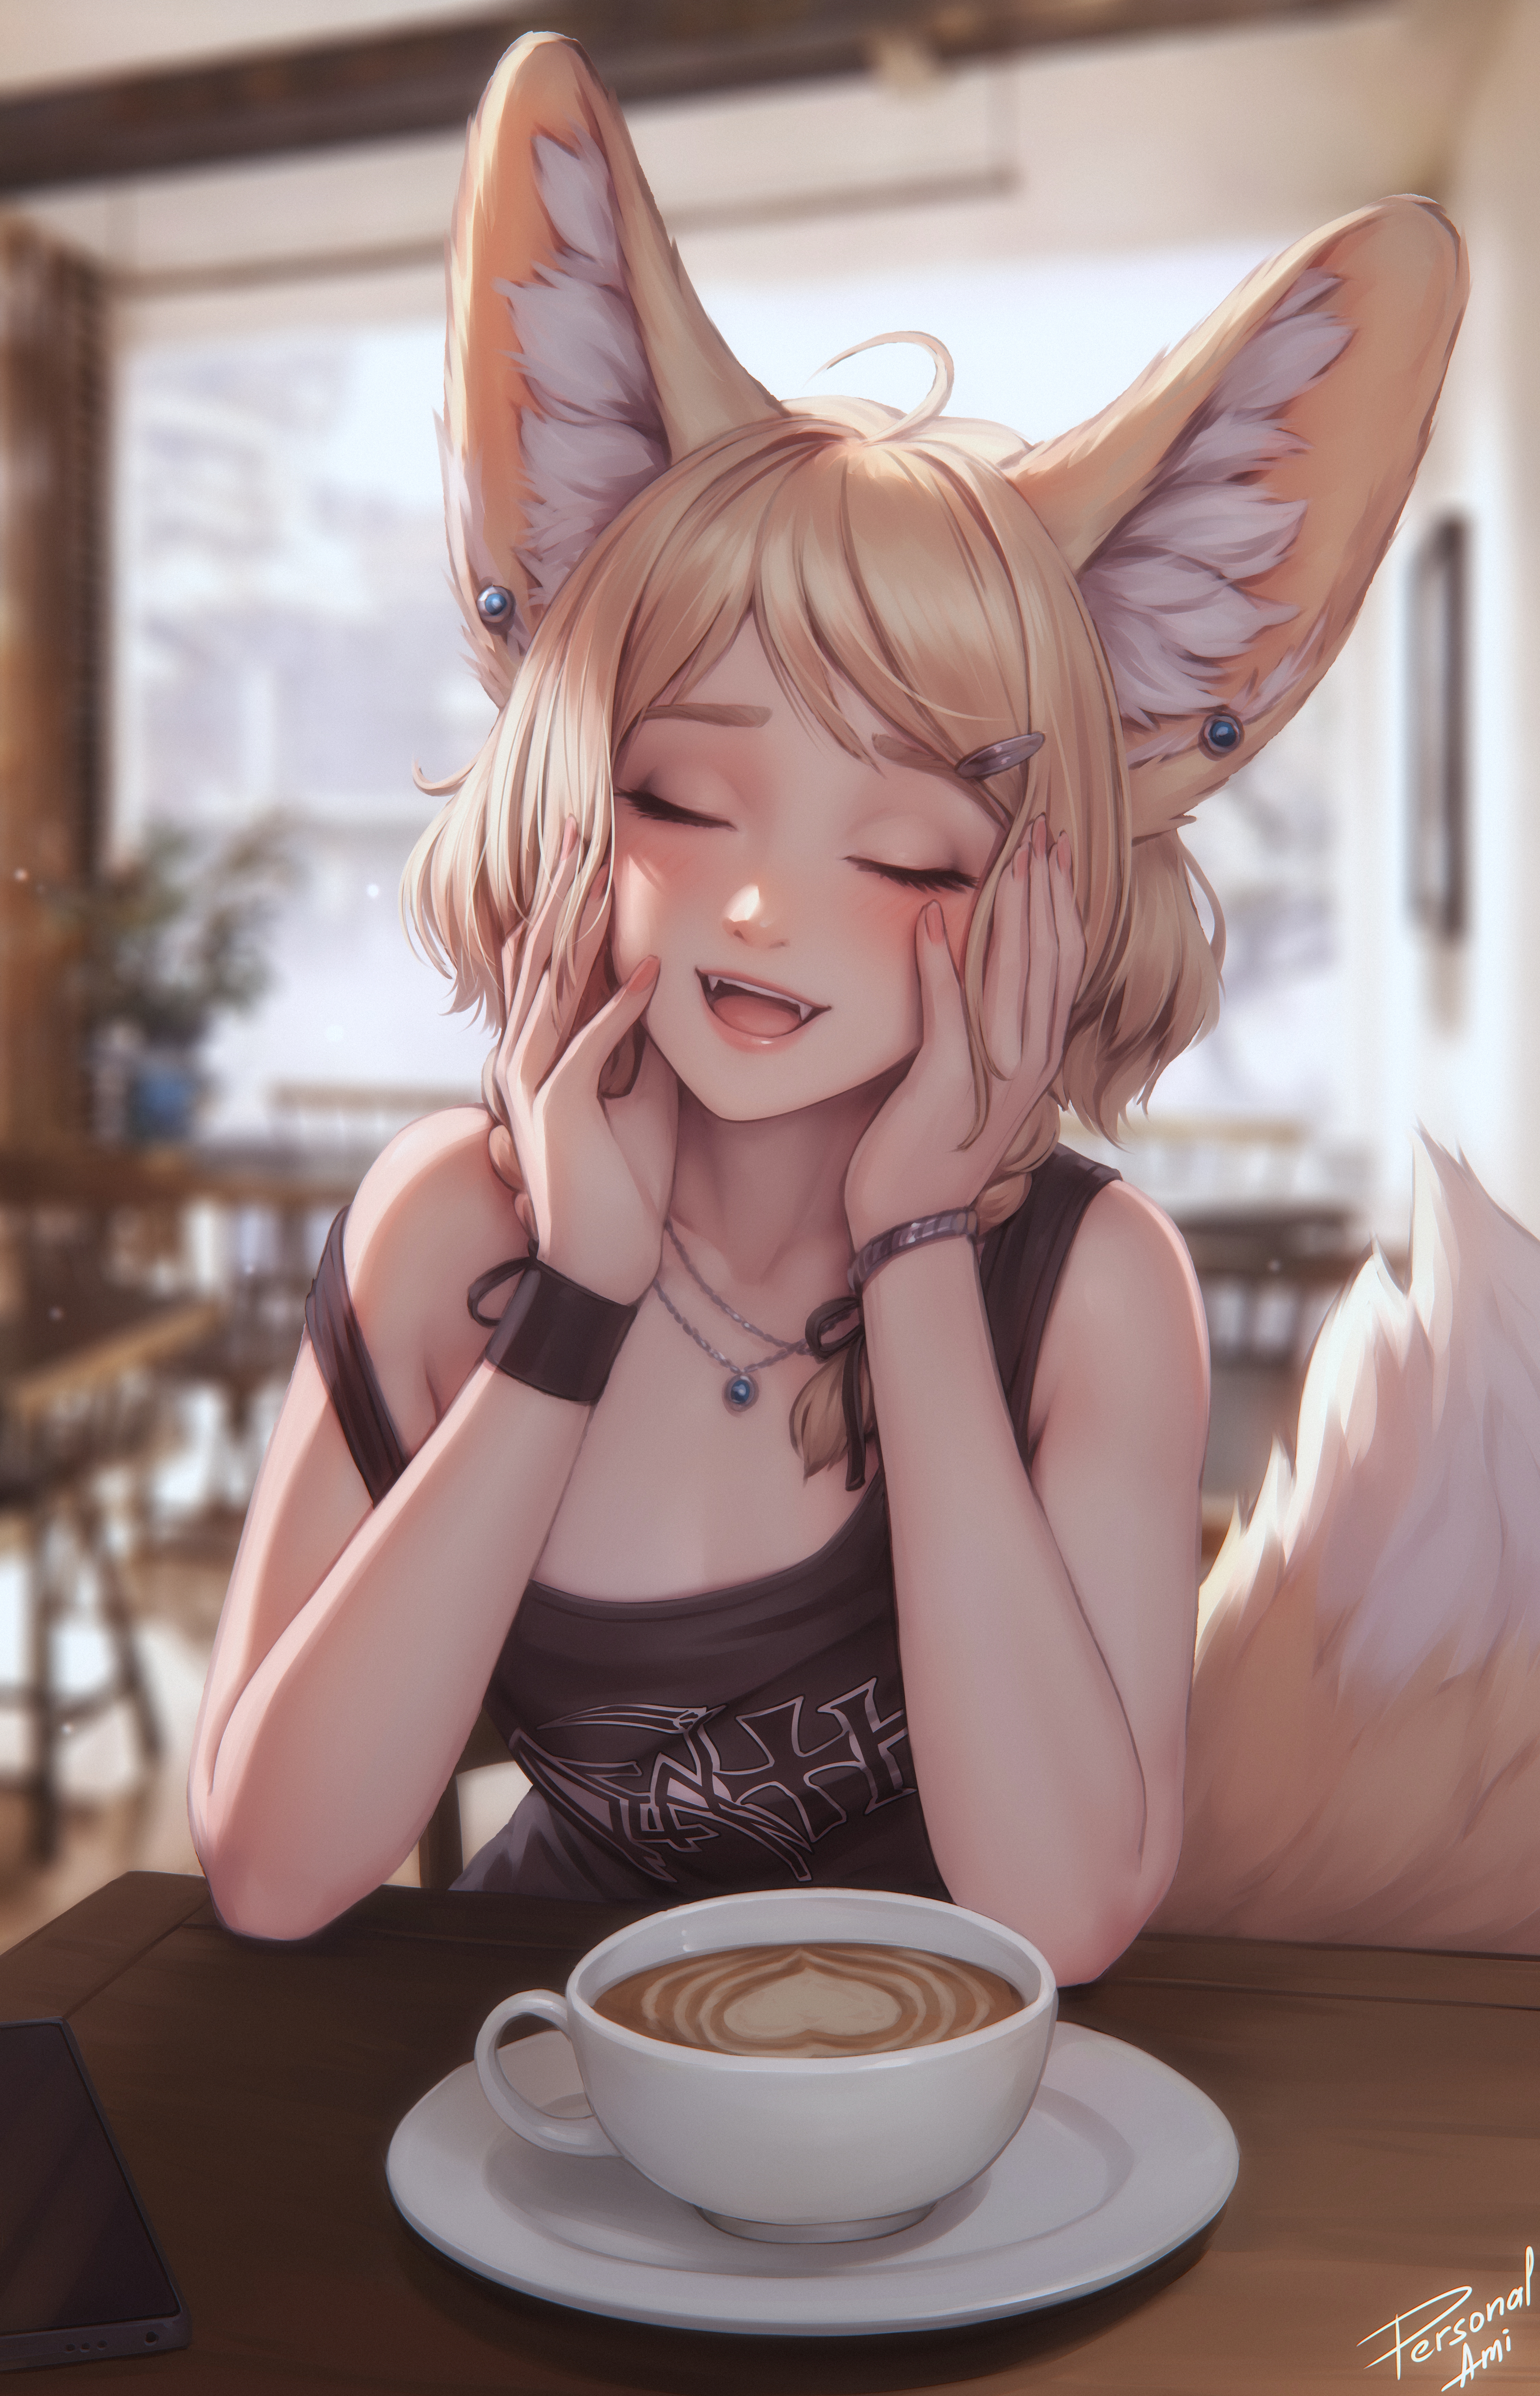 Anime 4500x7000 Khiara (OC) anime anime girls coffee fantasy girl closed eyes original characters drink portrait display drawing indoors women indoors signature artwork cup fox ears fox tail fox girl blonde smiling open mouth bracelets necklace sitting sunlight table blushing hand on face fangs blurred blurry background hairpins heart (design) phone Personal ami